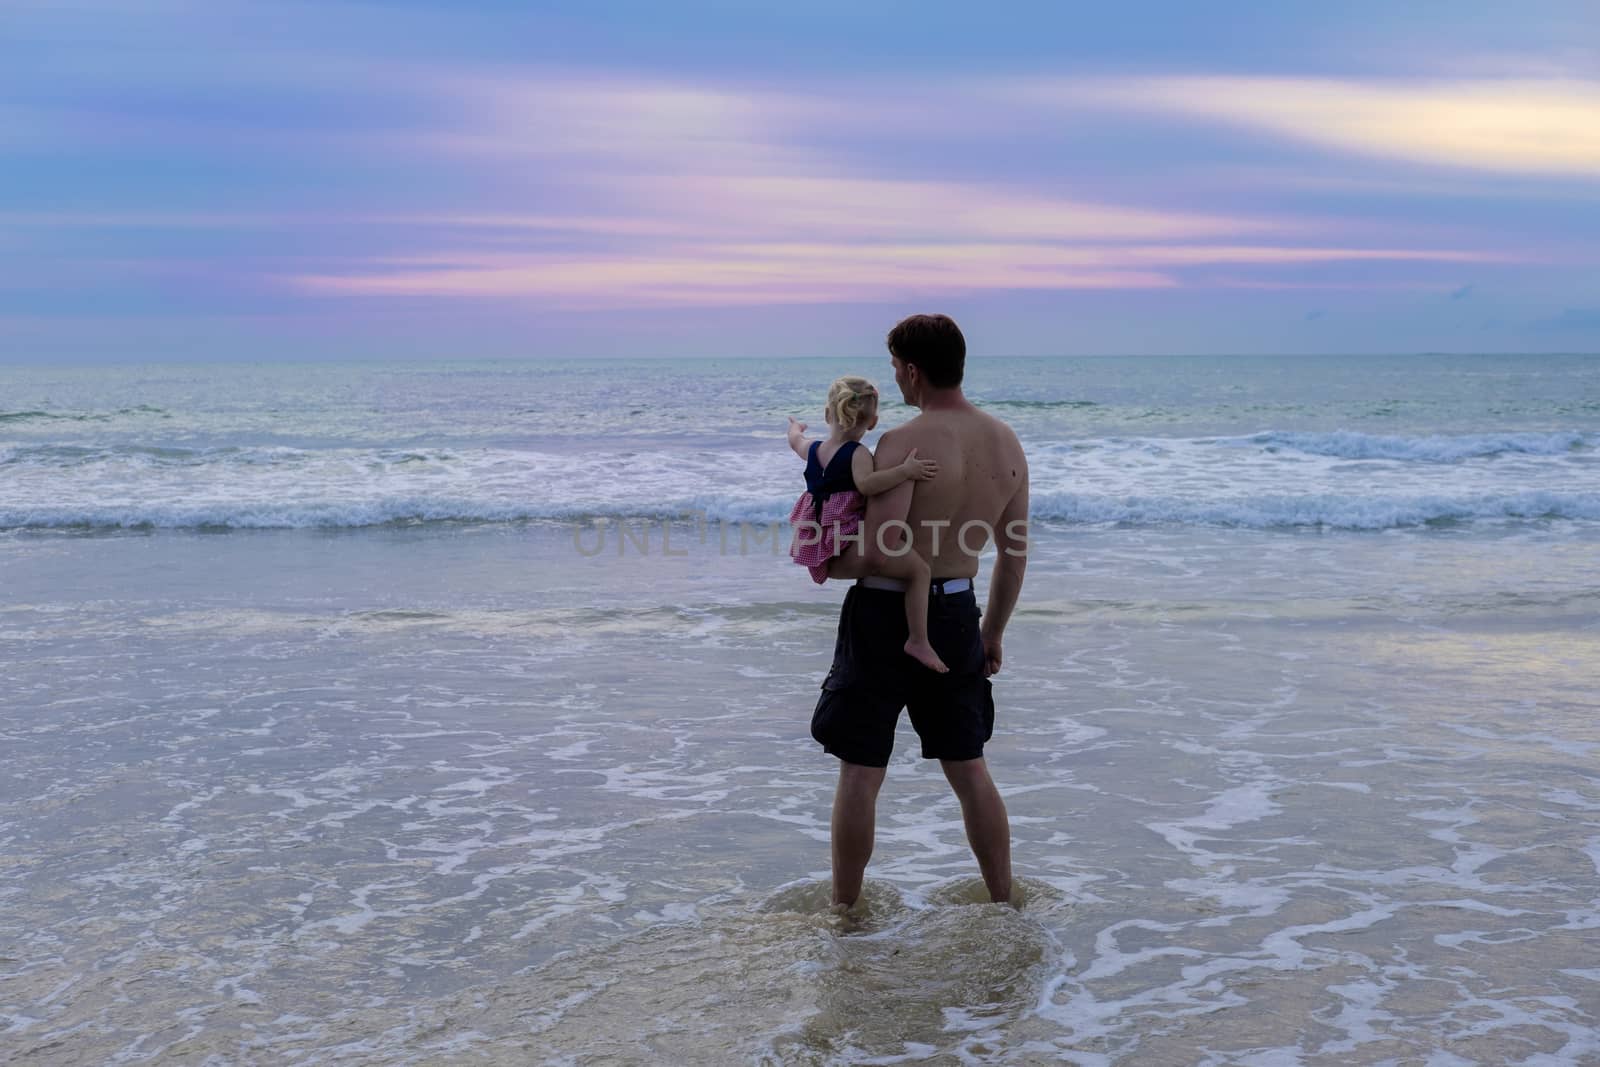 Father holds the daughter and shows her the beautiful spectacular sunset at the beach waves tide